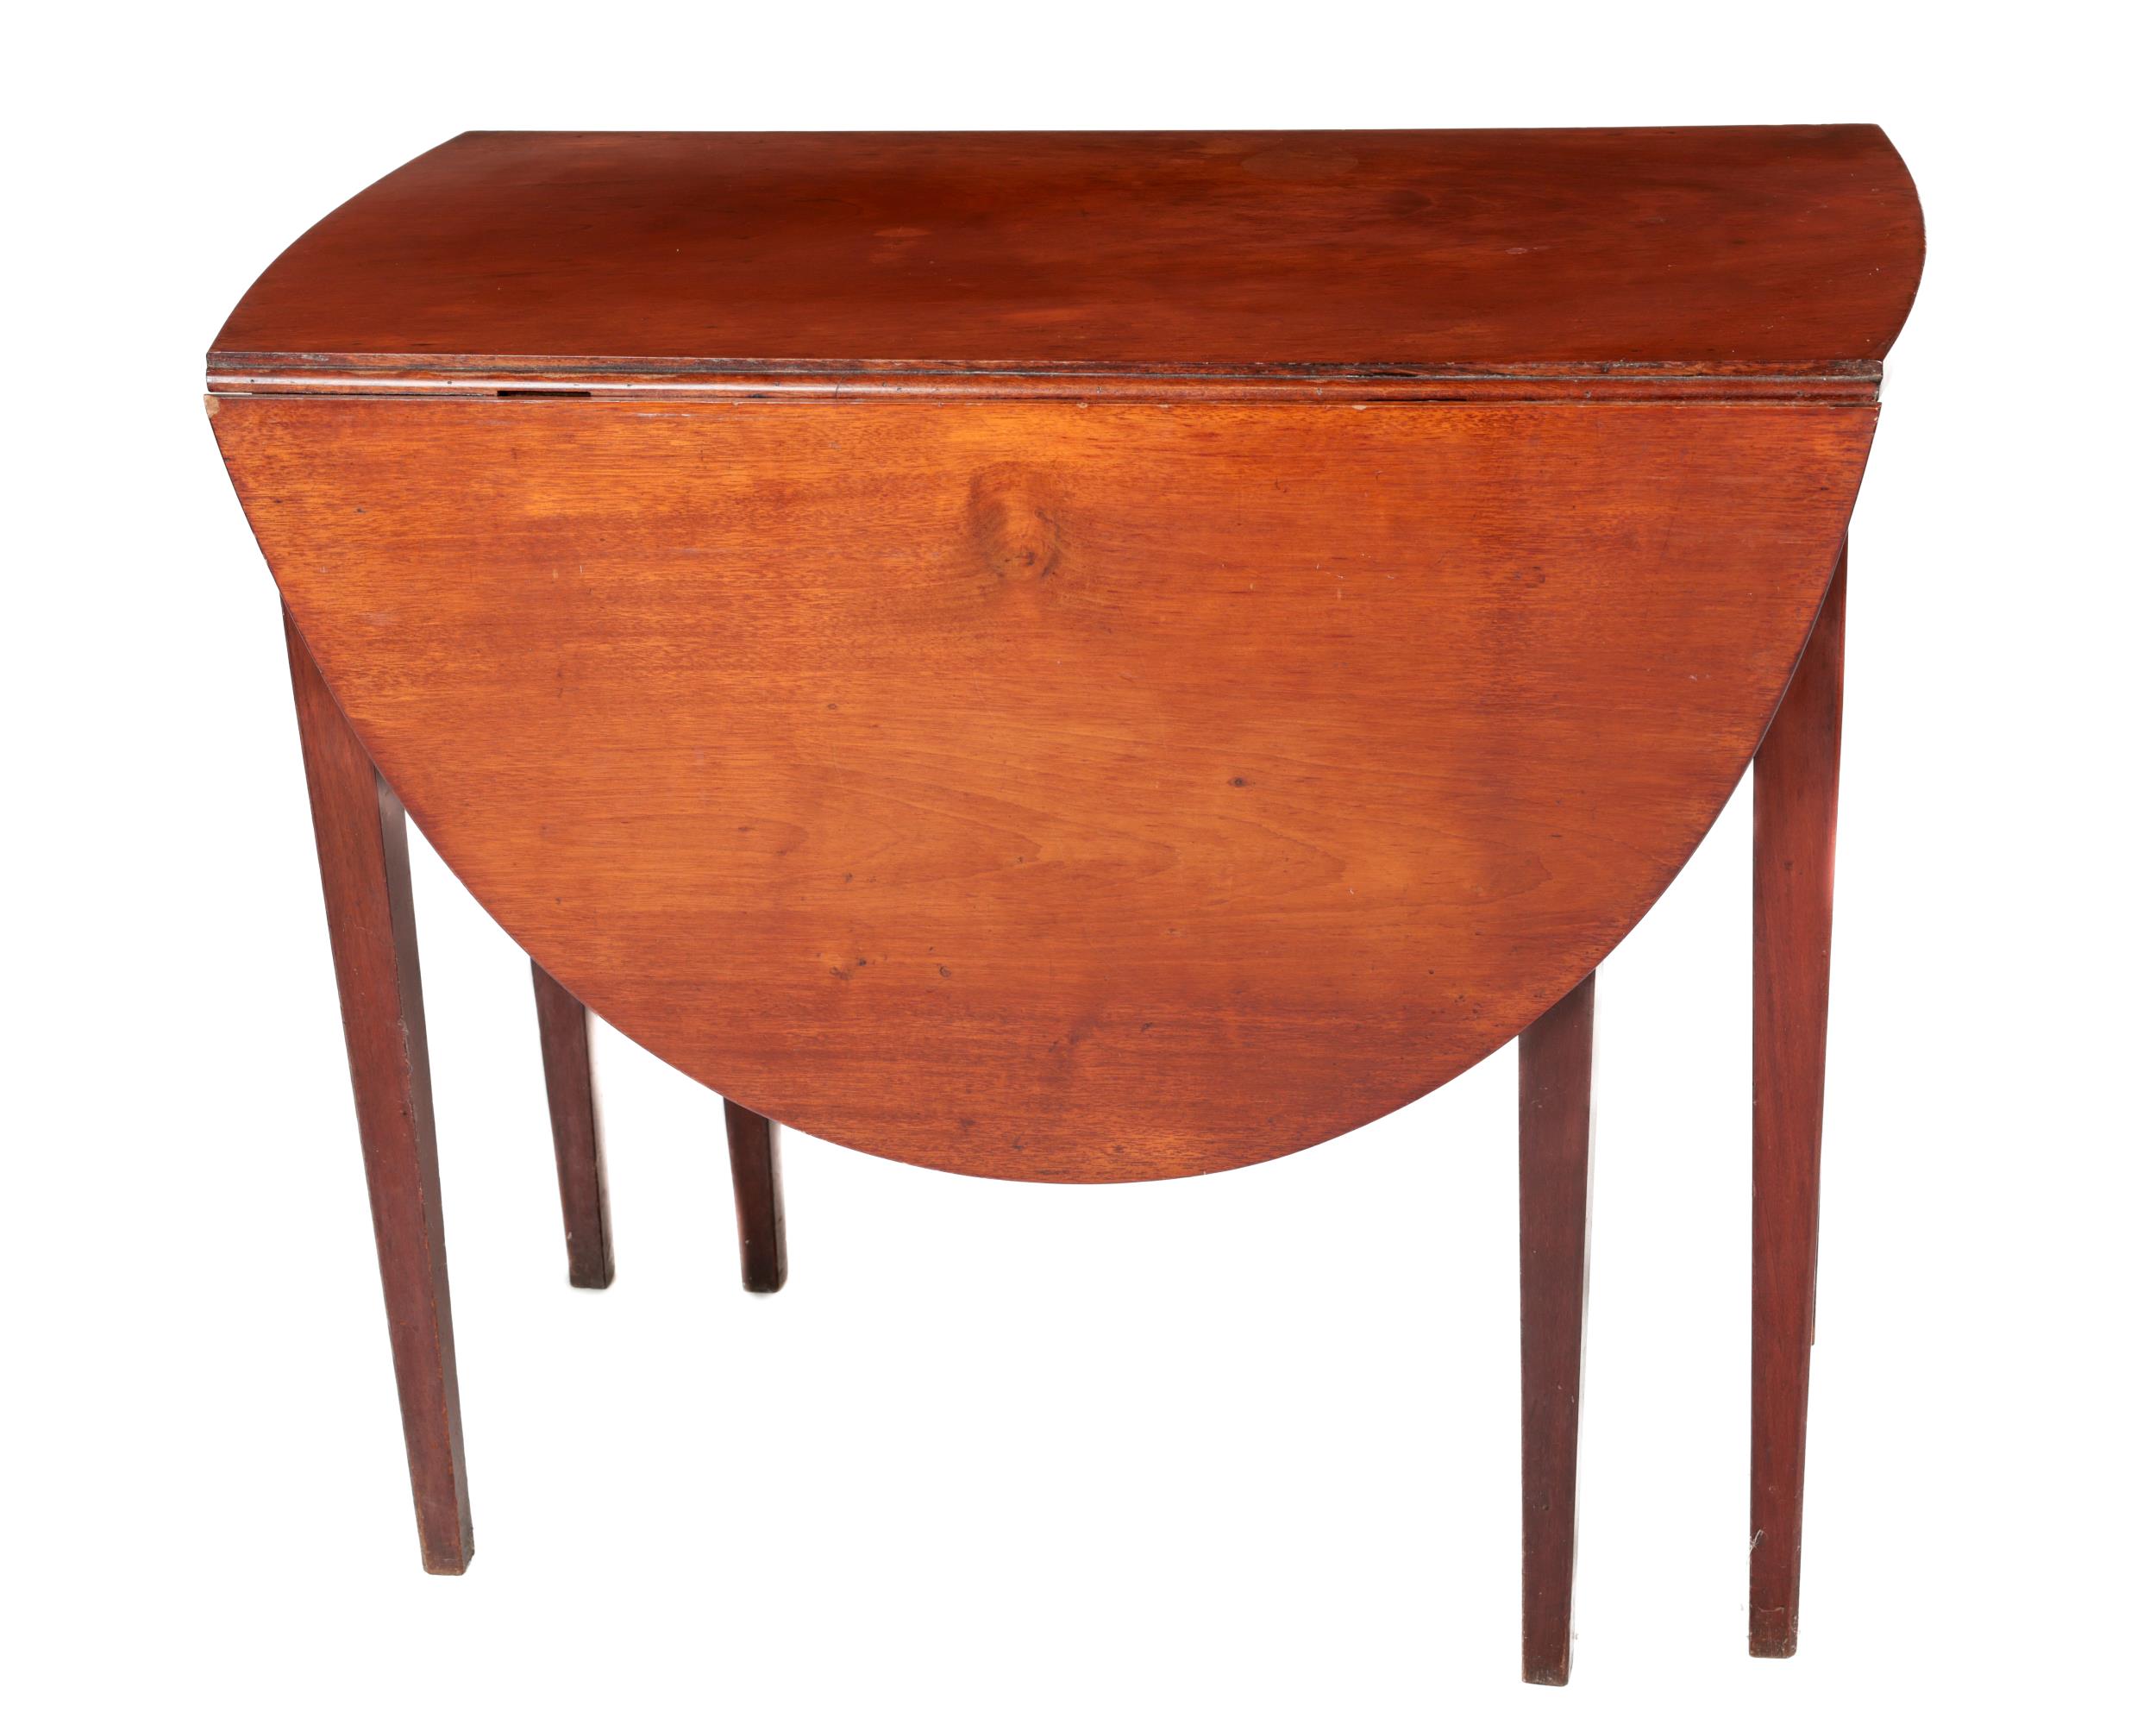 A 19th Century mahogany drop-leaf Table, with demi-lune flaps over frieze drawer, on square tapering